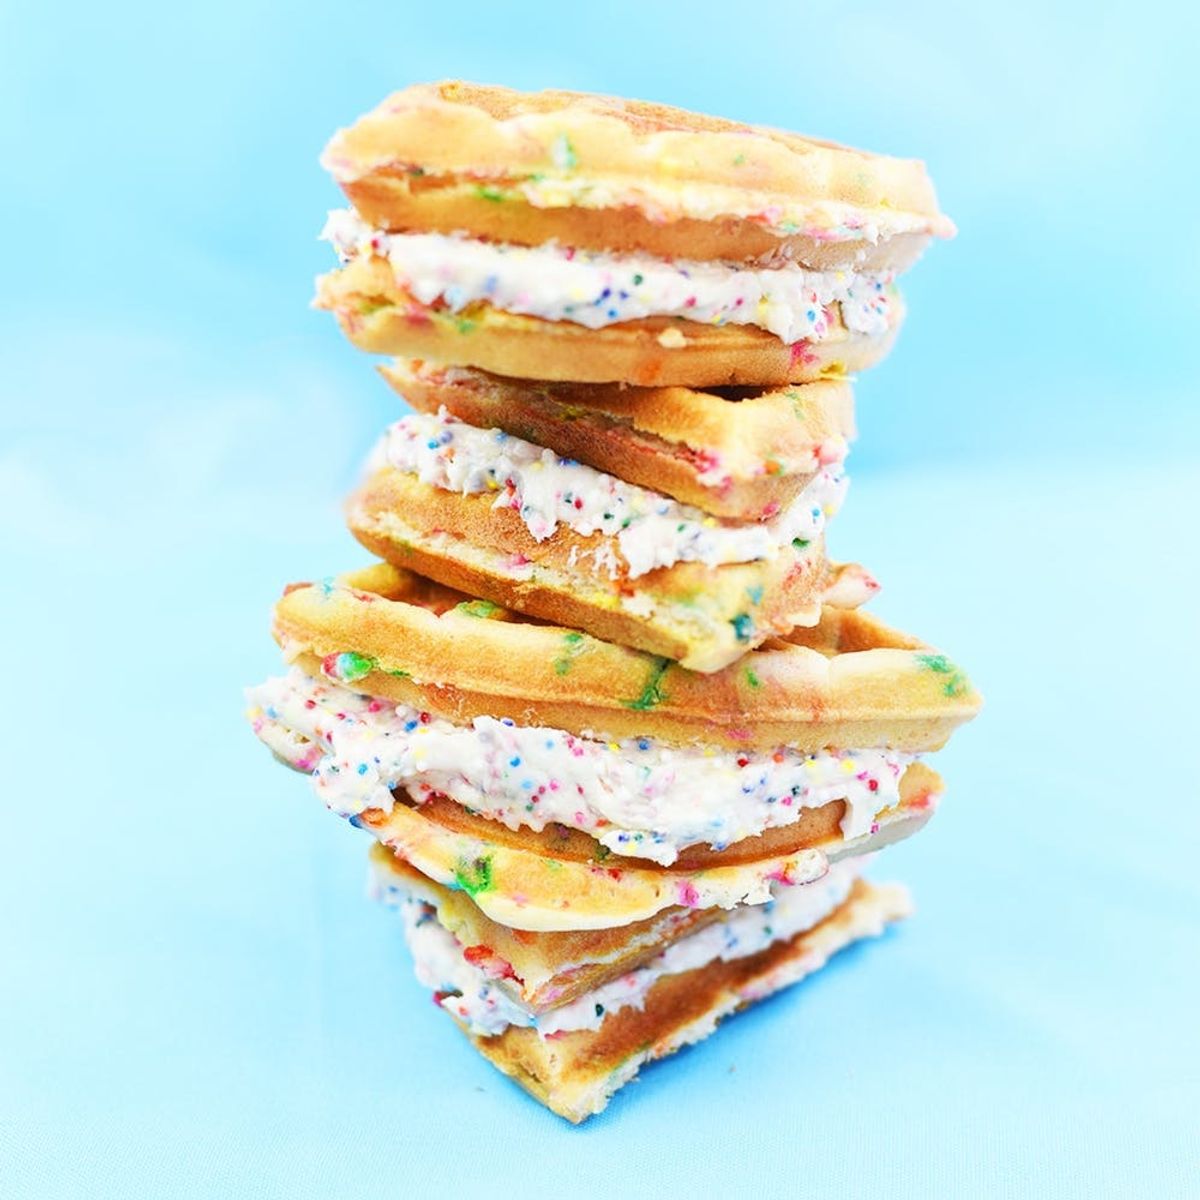 Get Your Rainbow Fix With This Funfetti Waffle Sandwich